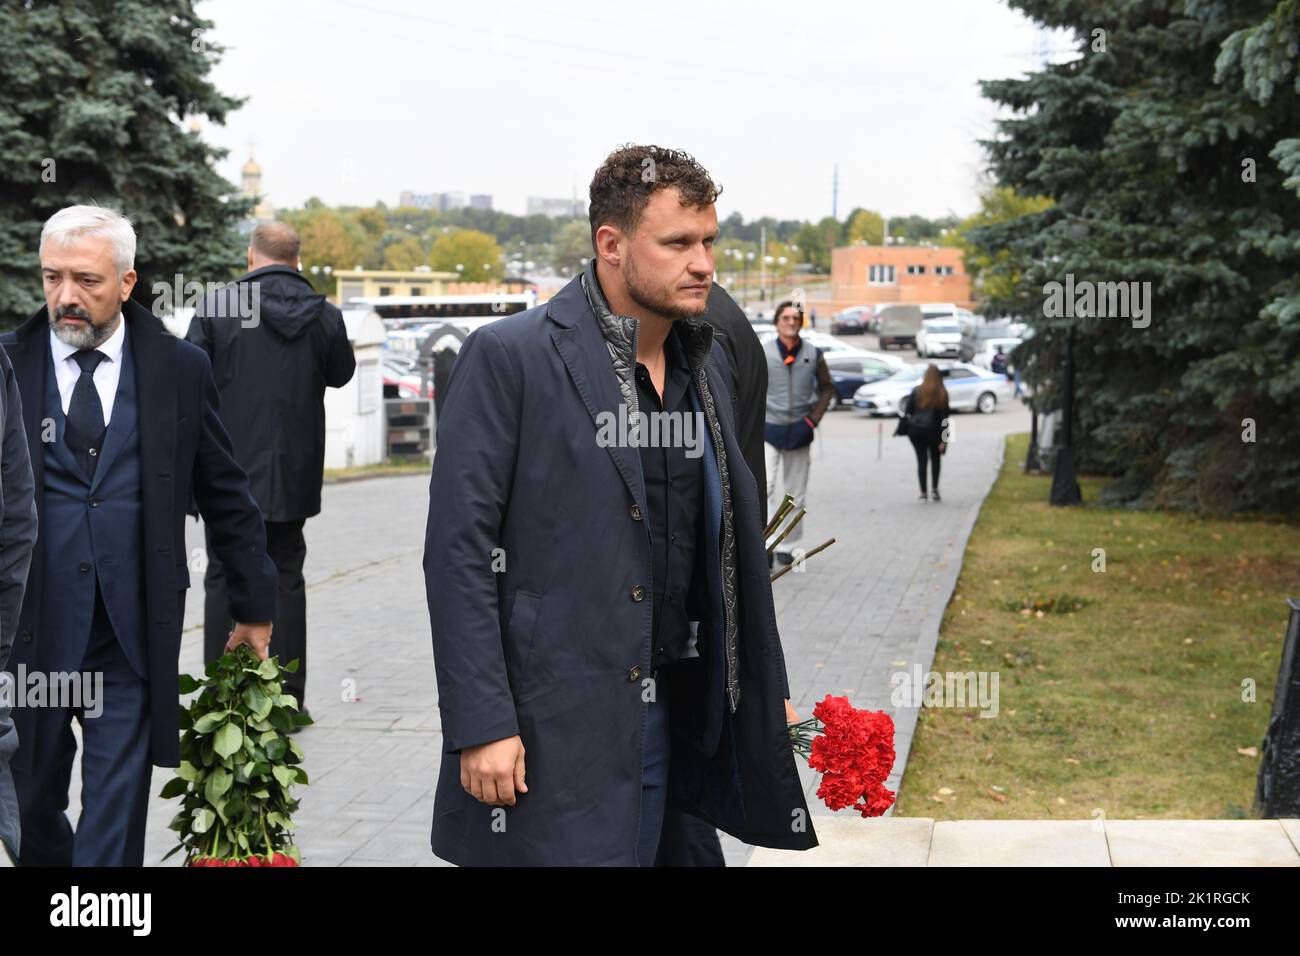 Moscow. The farmer, the cheesemaker, the founder of the Istra cheese dairy, the organizer of the Russian Parmesan project Oleg Sirota at a ceremony of farewell to the CEO of media group of Komsomolskaya Pravda Vladimir Sungorkin on the Troyekurovskoye Cemetery. Stock Photo